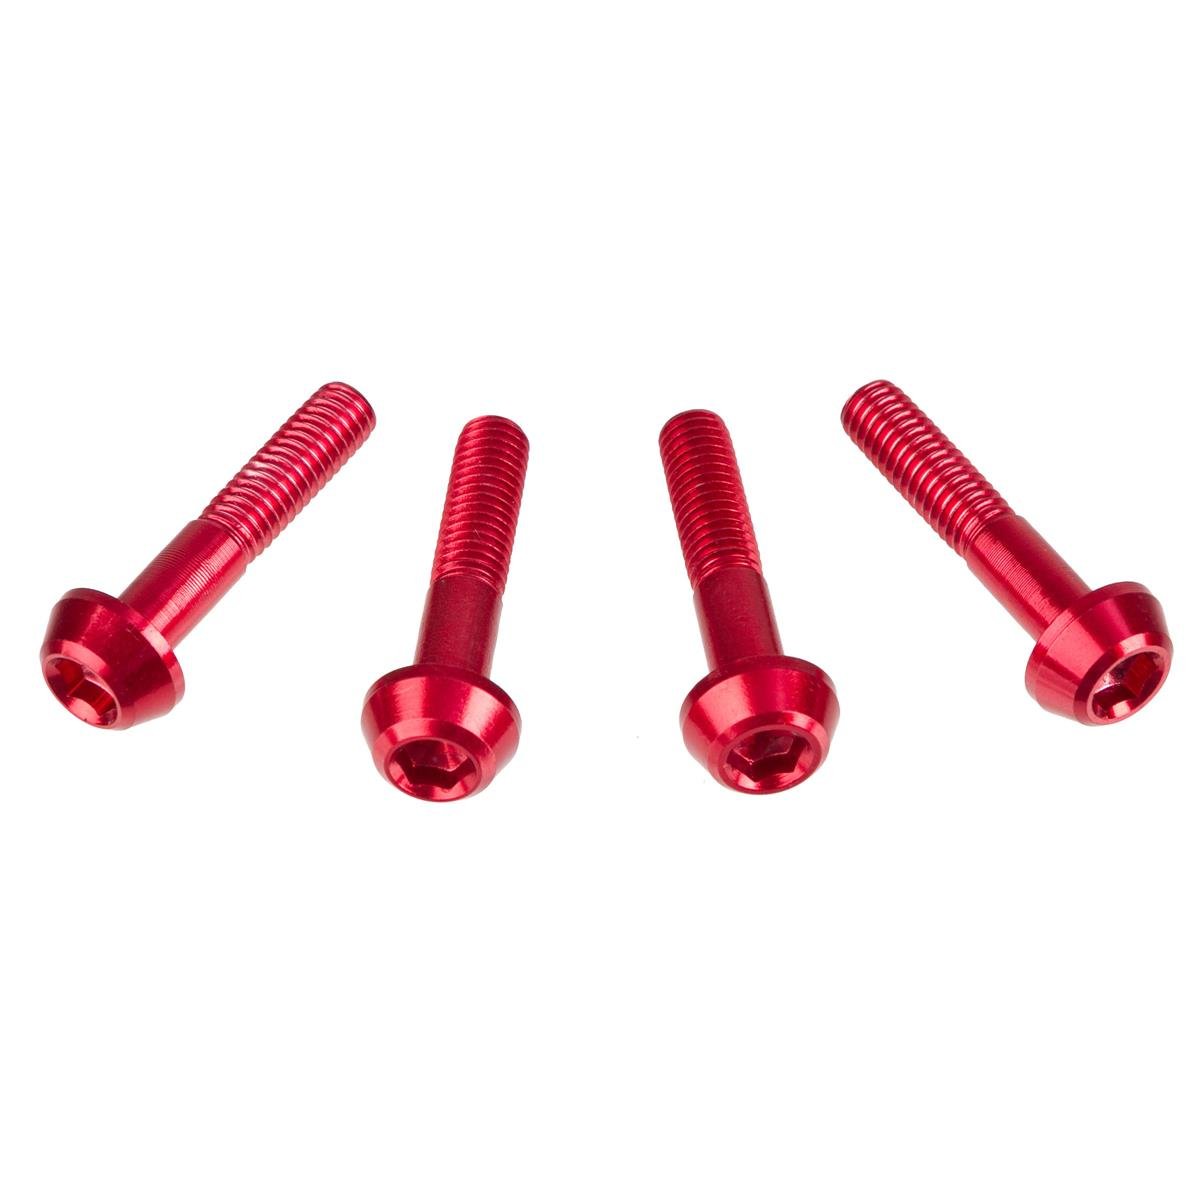 DRC Inner Hex Bolts  M6 x 30 mm, Red, Pack of 4